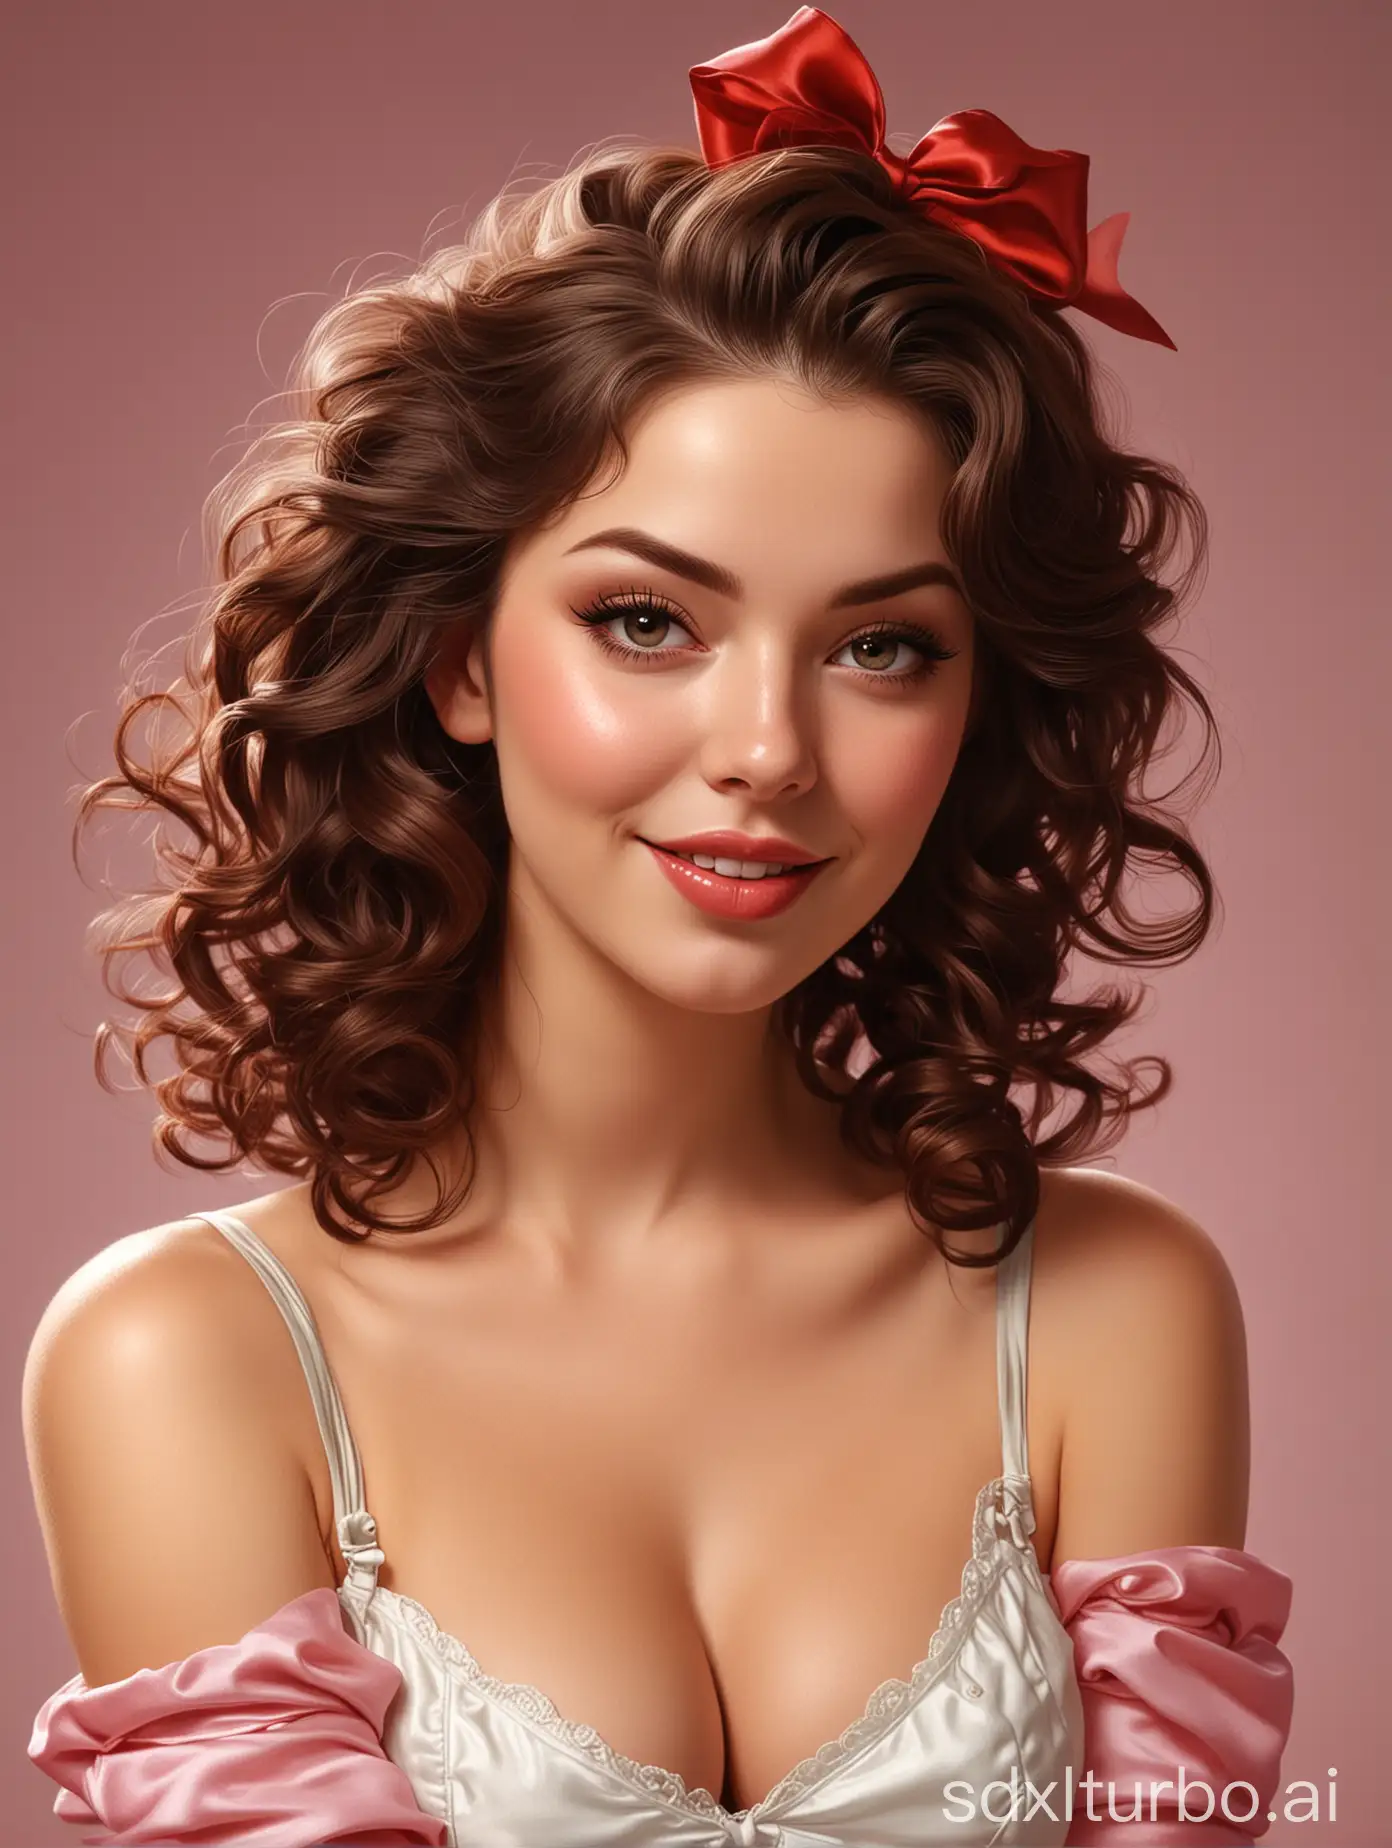 a woman sitting with legs wide open, masuimi max, submissive, curly blond, photorealistic, wicked, often described as flame-like, curvaceous. detailed expression, broomstick, porcelain white face, dominant, girl pinup, curls on top, red blush, chest and face, pinup style, in rapture, deep dimples, on a young beautiful woman neck, silky garment, girl in love, daisies, dominant pose, cheerful, a big smile on her face, glamorous hairstyle, very photorealistic, behance favorite, defined cheek bones, lady, natural contour aesthetics, perfect face, curls on top, high resolution:: gil elvgren, head and shoulders shot, shoulder-length brown hair, very extremely beautiful, dating app icon, coiffed brown hair, kinkade. award winning, gorgeous digital painting, sexy hot body, inspired by Alberto Vargas, looks like young liv tyler, raspberry, an oil painting of a kitten, rosette, crimson tide, by Thomas Doughty, sarah, dark pin-up style hair, evokes delight, rosette, red hot, knees, bow, eyecandy, seams, realistic cute girl painting, dark pin-up style hair, awarded on cgsociety, with curls, ultrarealistic sweet bunny girl, girl in studio, drawn in the style of mark arian, (waitress) girl, 50s, bodypainting, a picture by Zofia Stryjenska